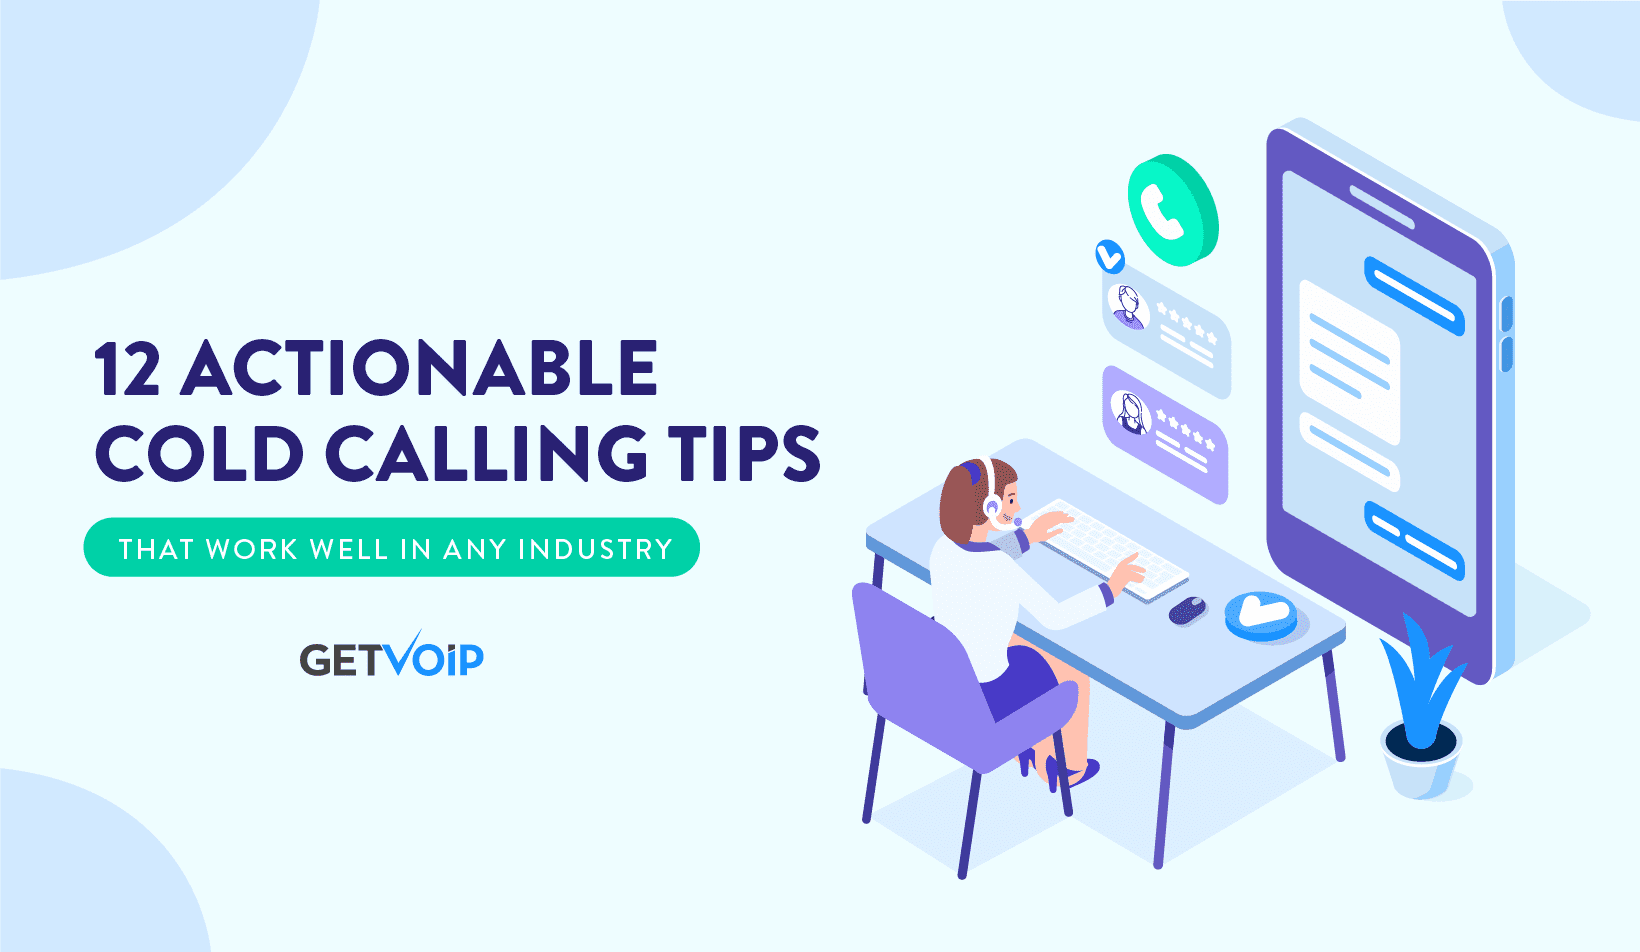 12 Actionable Cold Calling Tips That Work Well in Any Industry